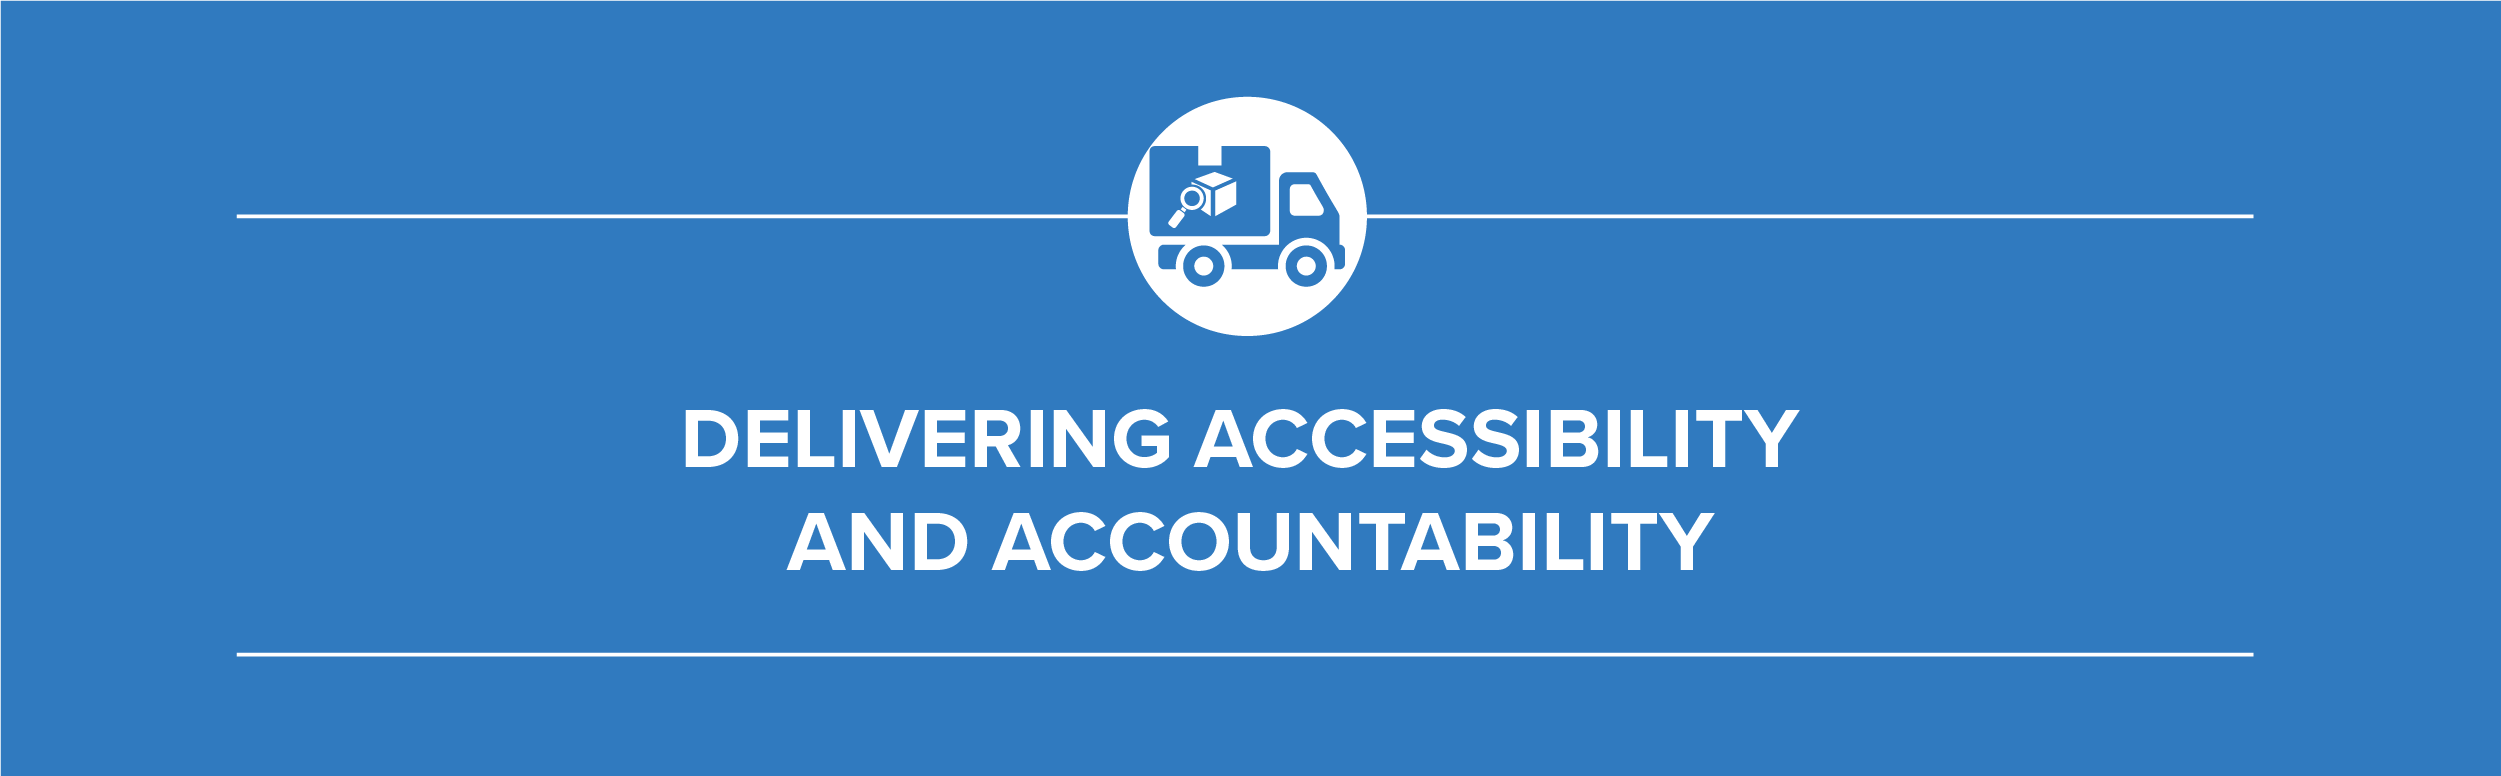 Blog_Delivering_Accessibility_Accountability